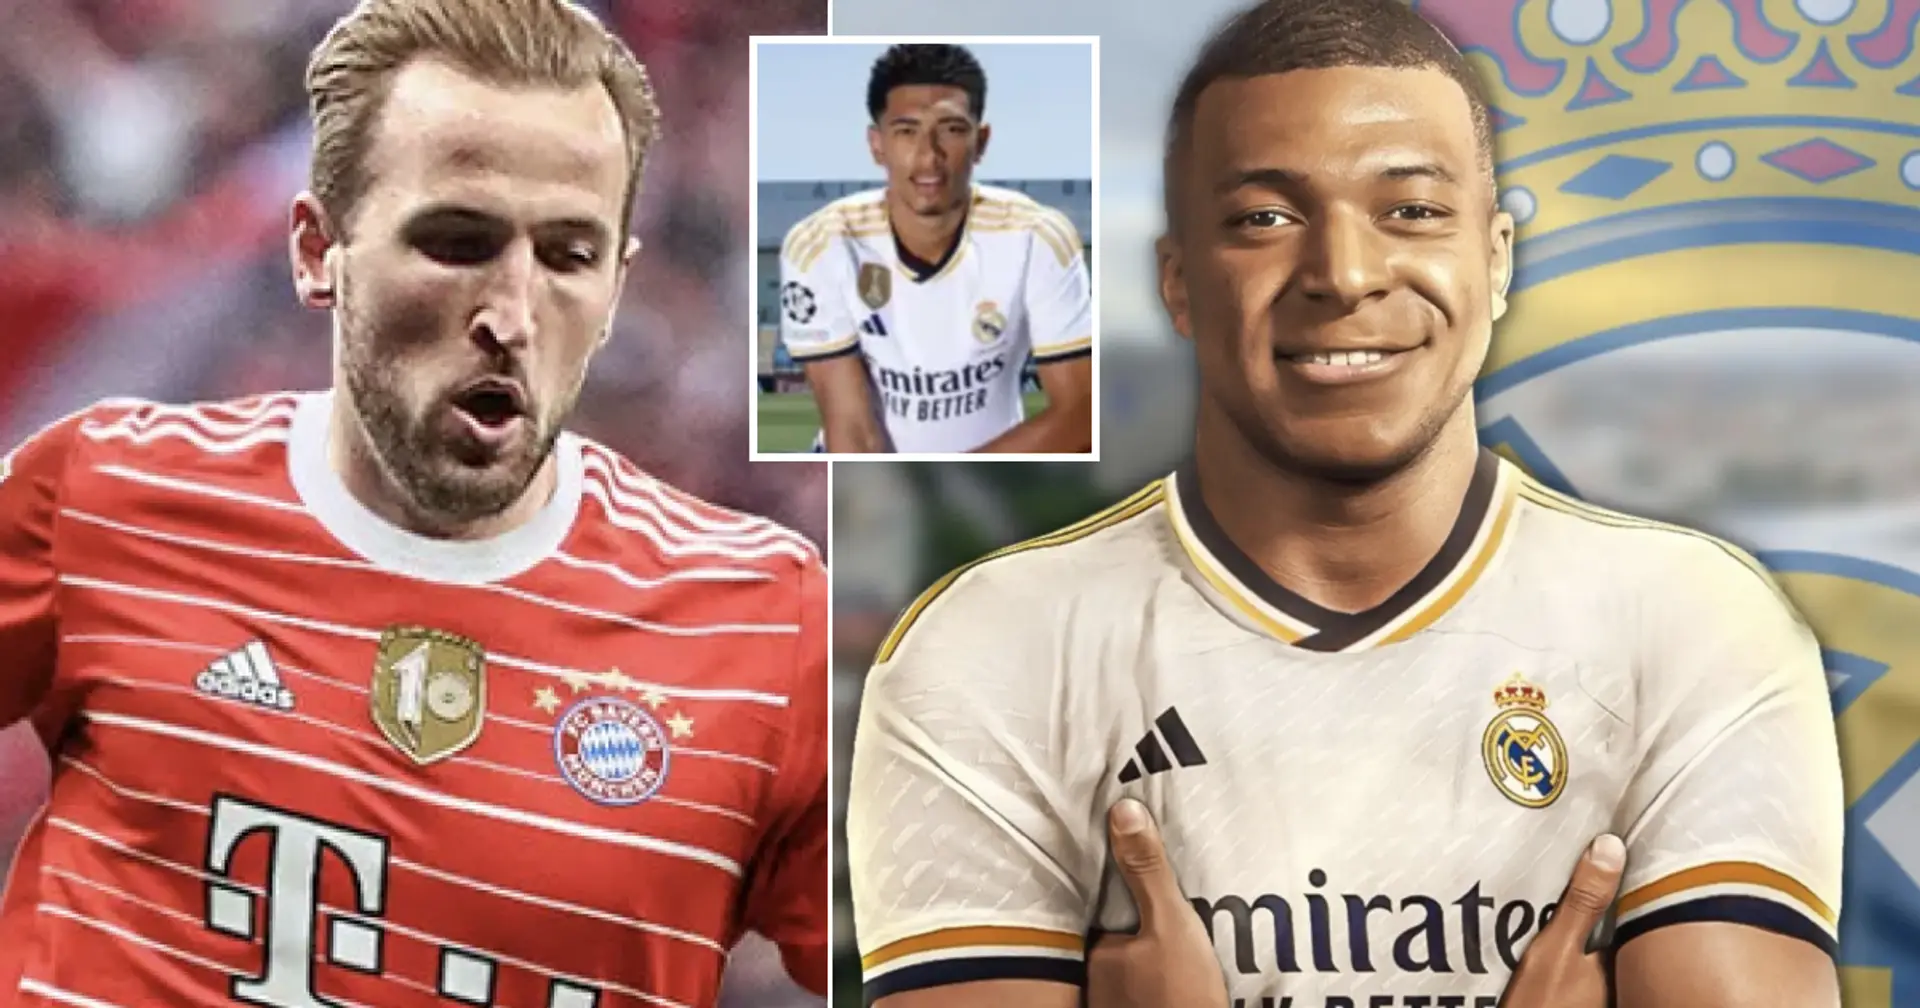 Real Madrid could land Mbappe, Bayern to make 2 top signings: global transfer market review